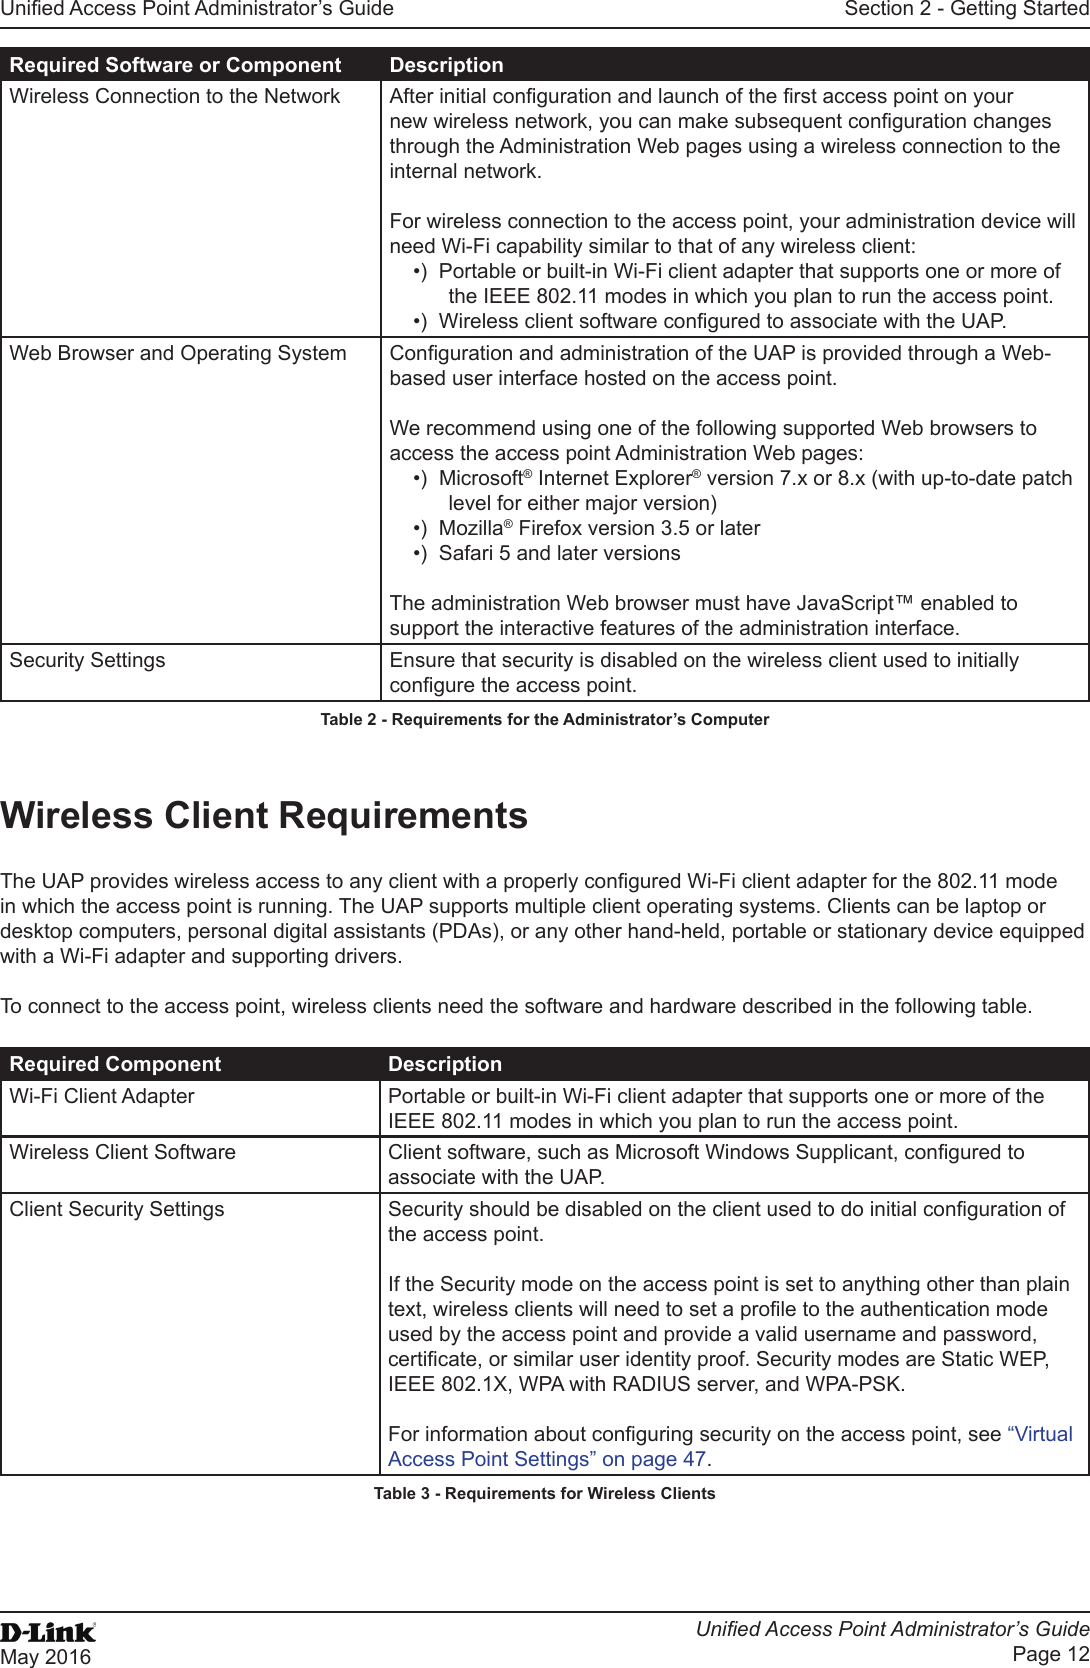 Unied Access Point Administrator’s GuideUnied Access Point Administrator’s GuidePage 12May 2016Section 2 - Getting StartedRequired Software or Component DescriptionWireless Connection to the Network After initial conguration and launch of the rst access point on your new wireless network, you can make subsequent conguration changes through the Administration Web pages using a wireless connection to the internal network. For wireless connection to the access point, your administration device will need Wi-Fi capability similar to that of any wireless client:•)  Portable or built-in Wi-Fi client adapter that supports one or more of the IEEE 802.11 modes in which you plan to run the access point.•)  Wireless client software congured to associate with the UAP.Web Browser and Operating System Conguration and administration of the UAP is provided through a Web-based user interface hosted on the access point. We recommend using one of the following supported Web browsers to access the access point Administration Web pages:•)  Microsoft® Internet Explorer® version 7.x or 8.x (with up-to-date patch level for either major version)•)  Mozilla® Firefox version 3.5 or later•)  Safari 5 and later versionsThe administration Web browser must have JavaScript™ enabled to support the interactive features of the administration interface.Security Settings Ensure that security is disabled on the wireless client used to initially congure the access point.Table 2 - Requirements for the Administrator’s ComputerWireless Client RequirementsThe UAP provides wireless access to any client with a properly congured Wi-Fi client adapter for the 802.11 mode in which the access point is running. The UAP supports multiple client operating systems. Clients can be laptop or desktop computers, personal digital assistants (PDAs), or any other hand-held, portable or stationary device equipped with a Wi-Fi adapter and supporting drivers.To connect to the access point, wireless clients need the software and hardware described in the following table.Required Component DescriptionWi-Fi Client Adapter Portable or built-in Wi-Fi client adapter that supports one or more of the IEEE 802.11 modes in which you plan to run the access point.Wireless Client Software Client software, such as Microsoft Windows Supplicant, congured to associate with the UAP.Client Security Settings Security should be disabled on the client used to do initial conguration of the access point.If the Security mode on the access point is set to anything other than plain text, wireless clients will need to set a prole to the authentication mode used by the access point and provide a valid username and password, certicate, or similar user identity proof. Security modes are Static WEP, IEEE 802.1X, WPA with RADIUS server, and WPA-PSK.For information about conguring security on the access point, see “Virtual Access Point Settings” on page 47. Table 3 - Requirements for Wireless Clients